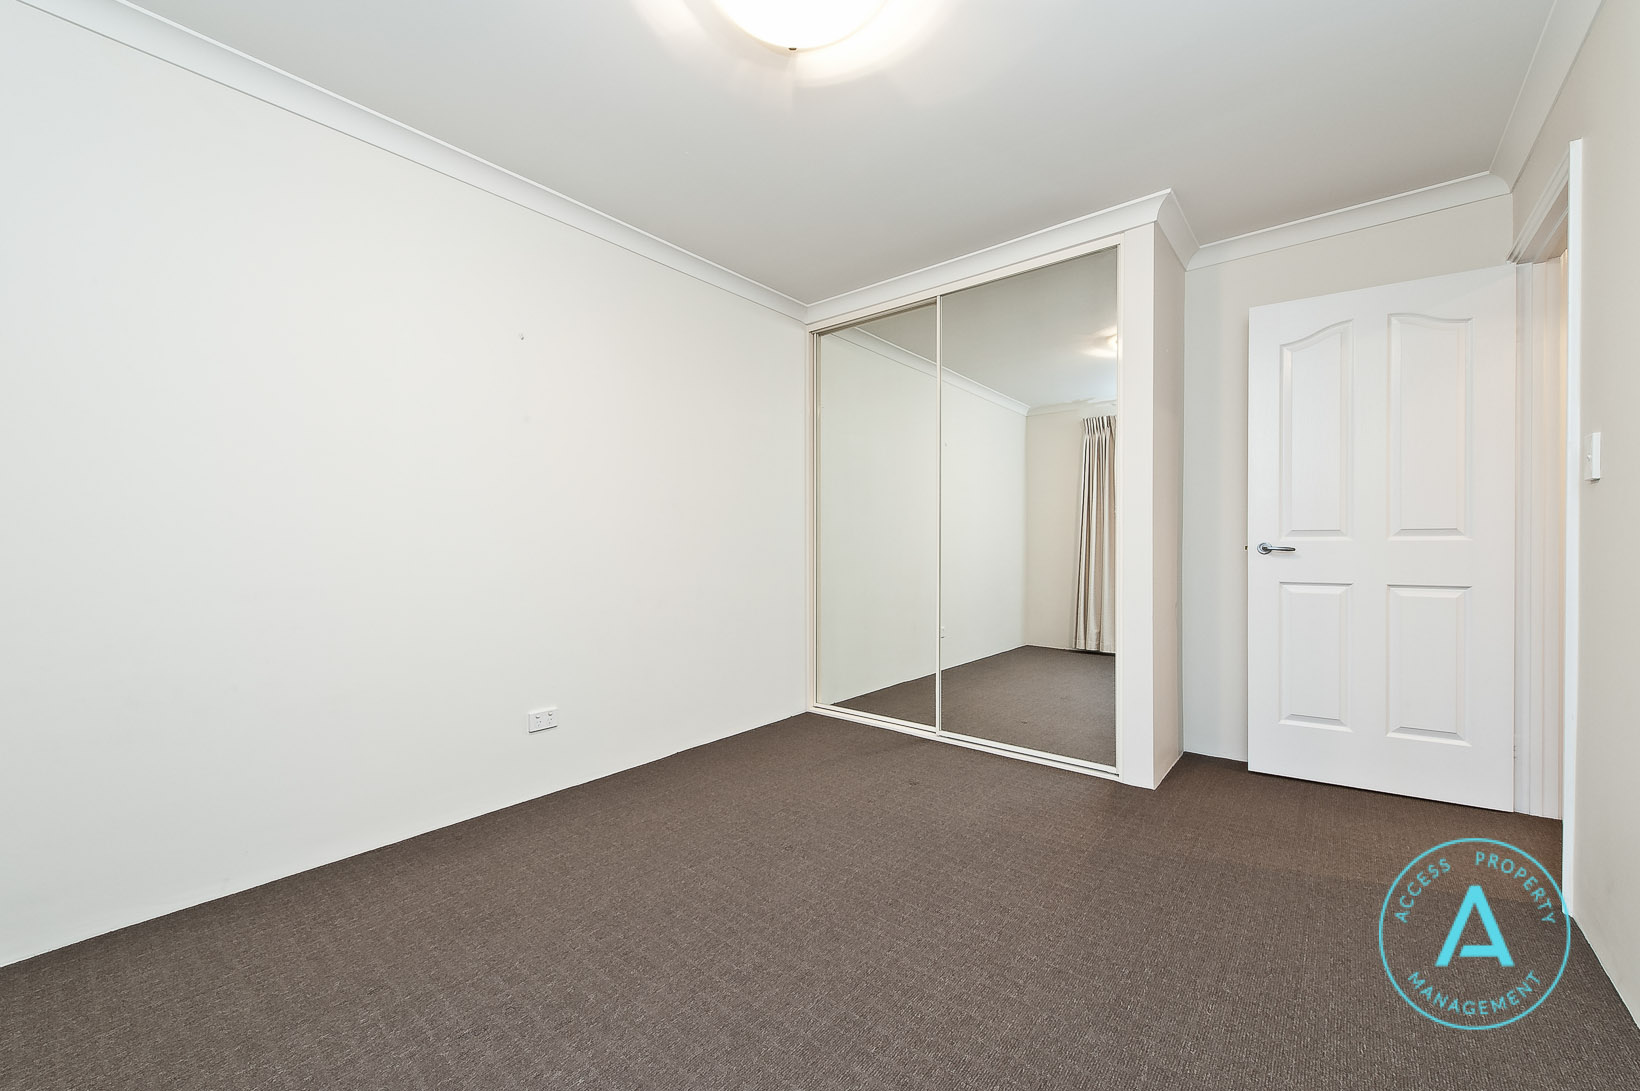 Access Property Management 7/8 Forster Avenue Bedroom